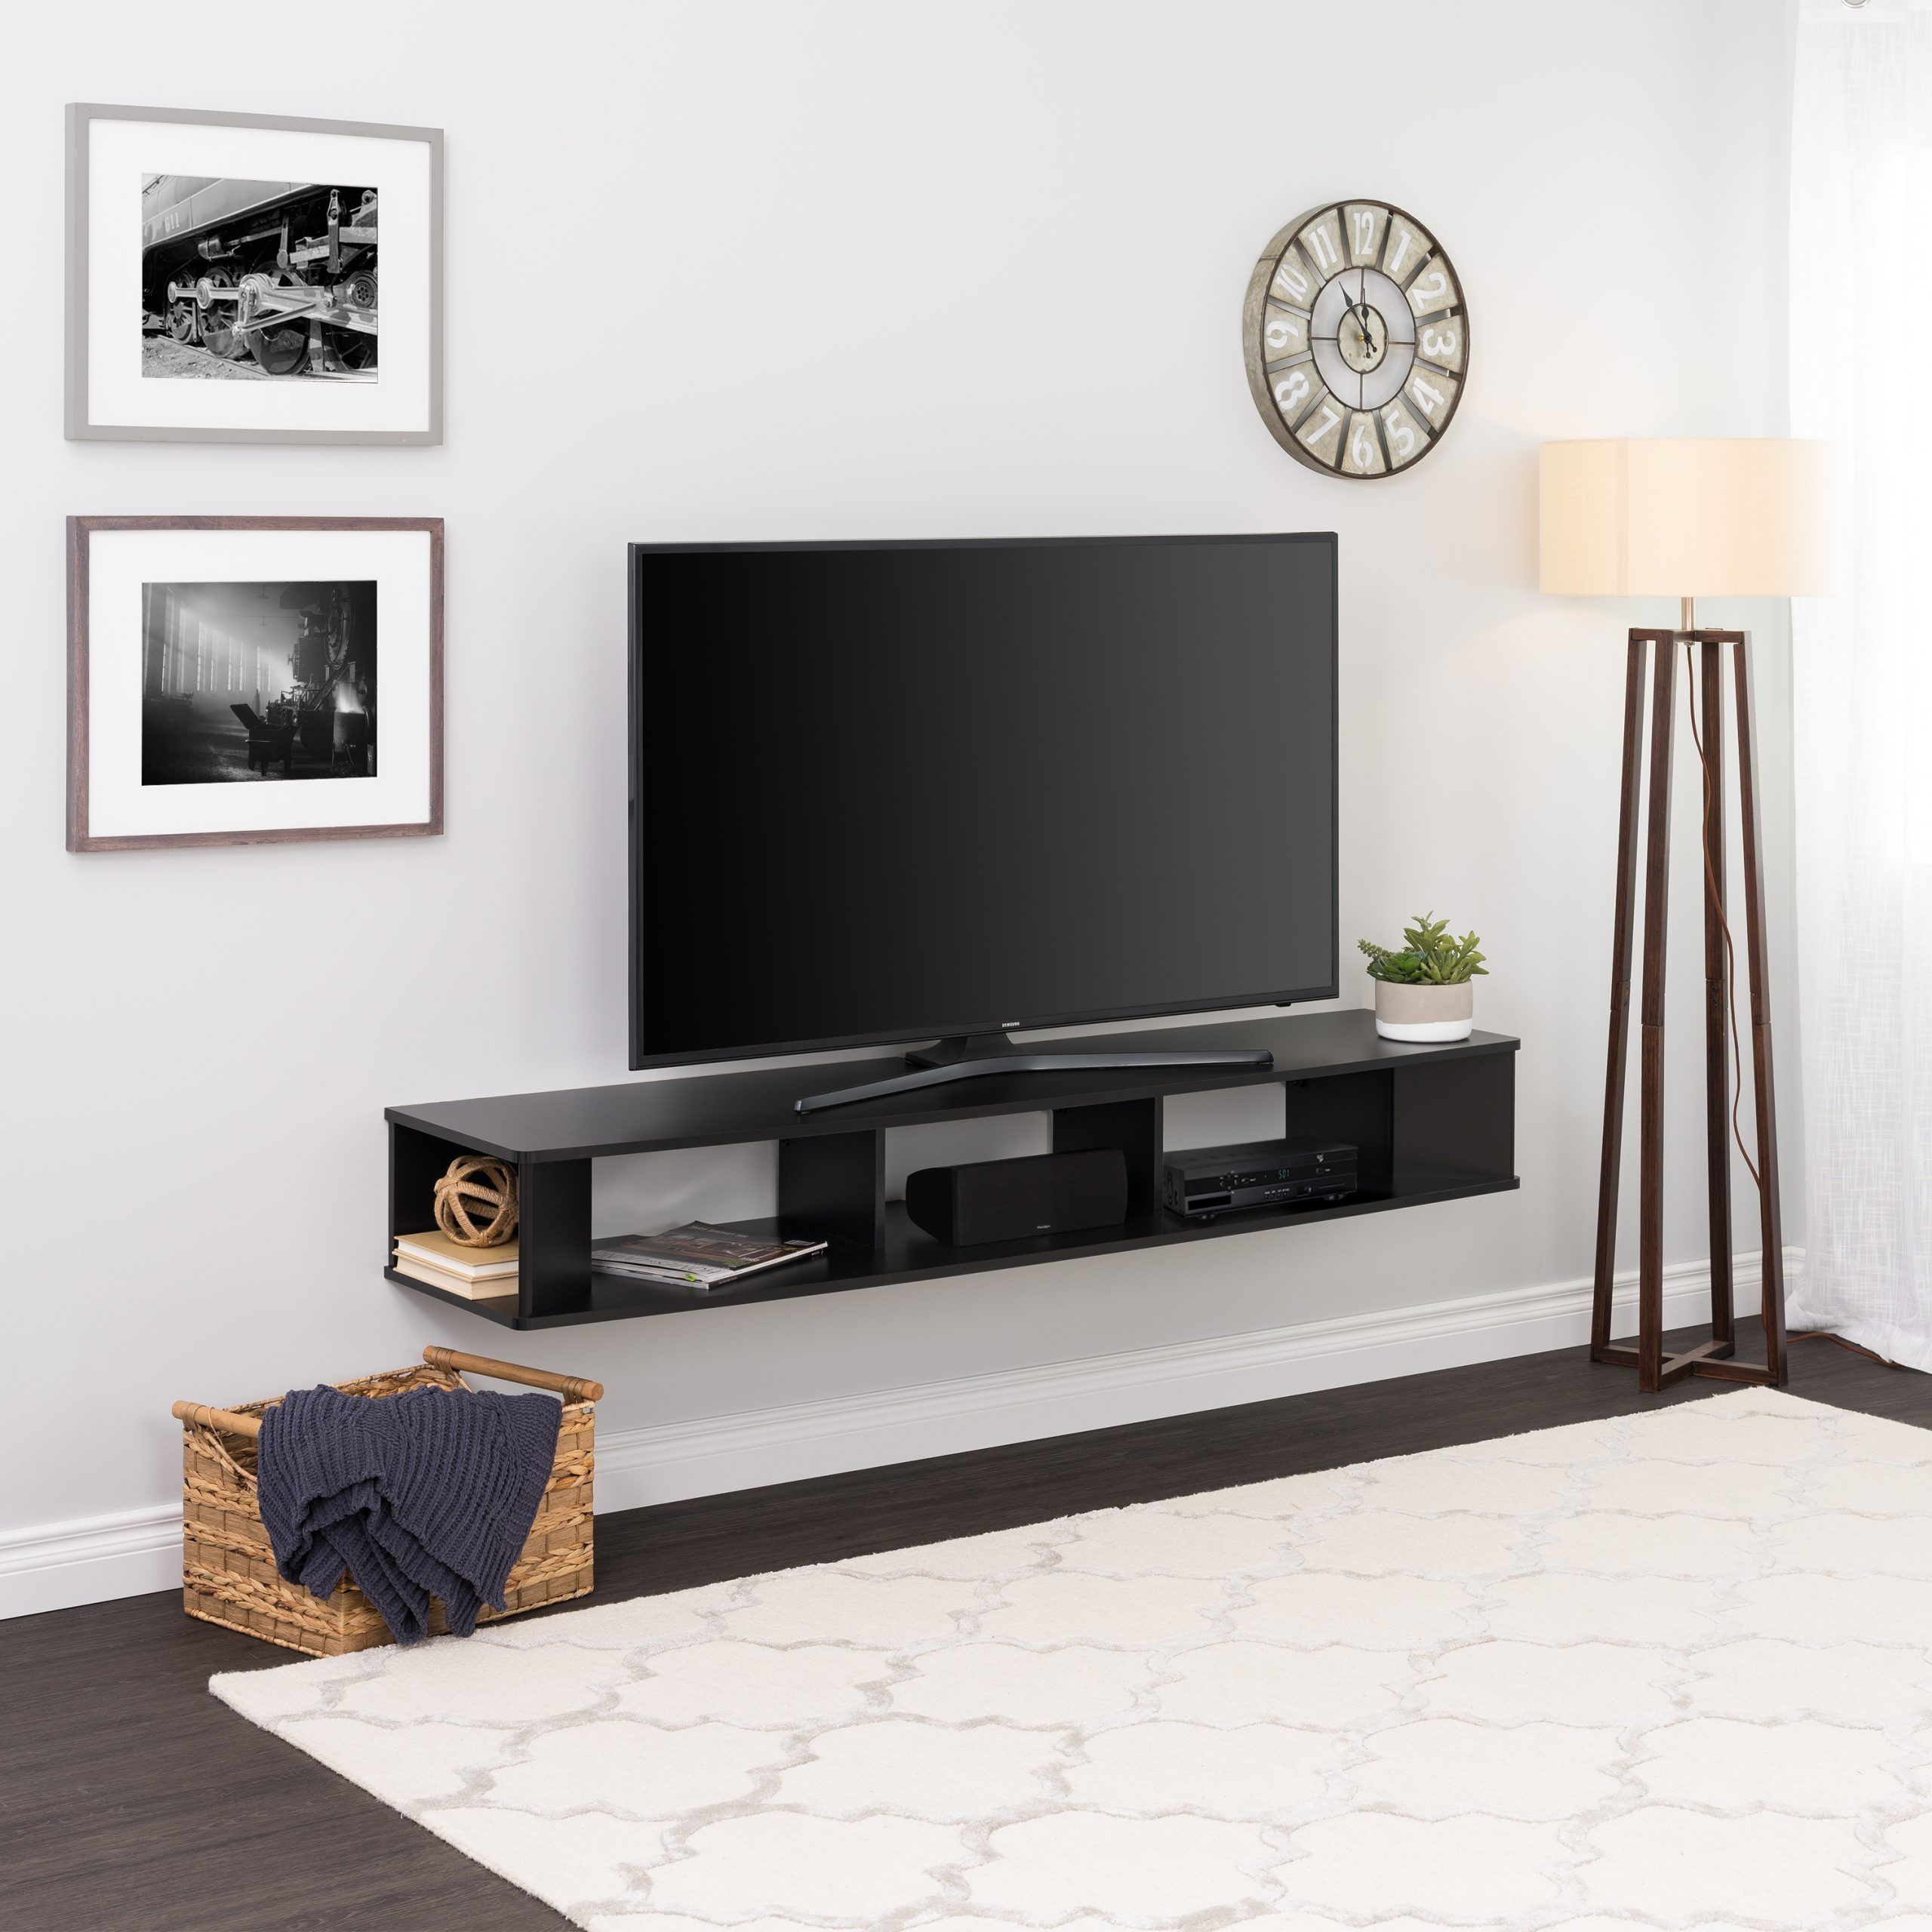 Prepac 70 Inch Wide Wall Mounted Tv Stand, Black – Walmart Intended For Console Under Wall Mounted Tv (View 3 of 15)